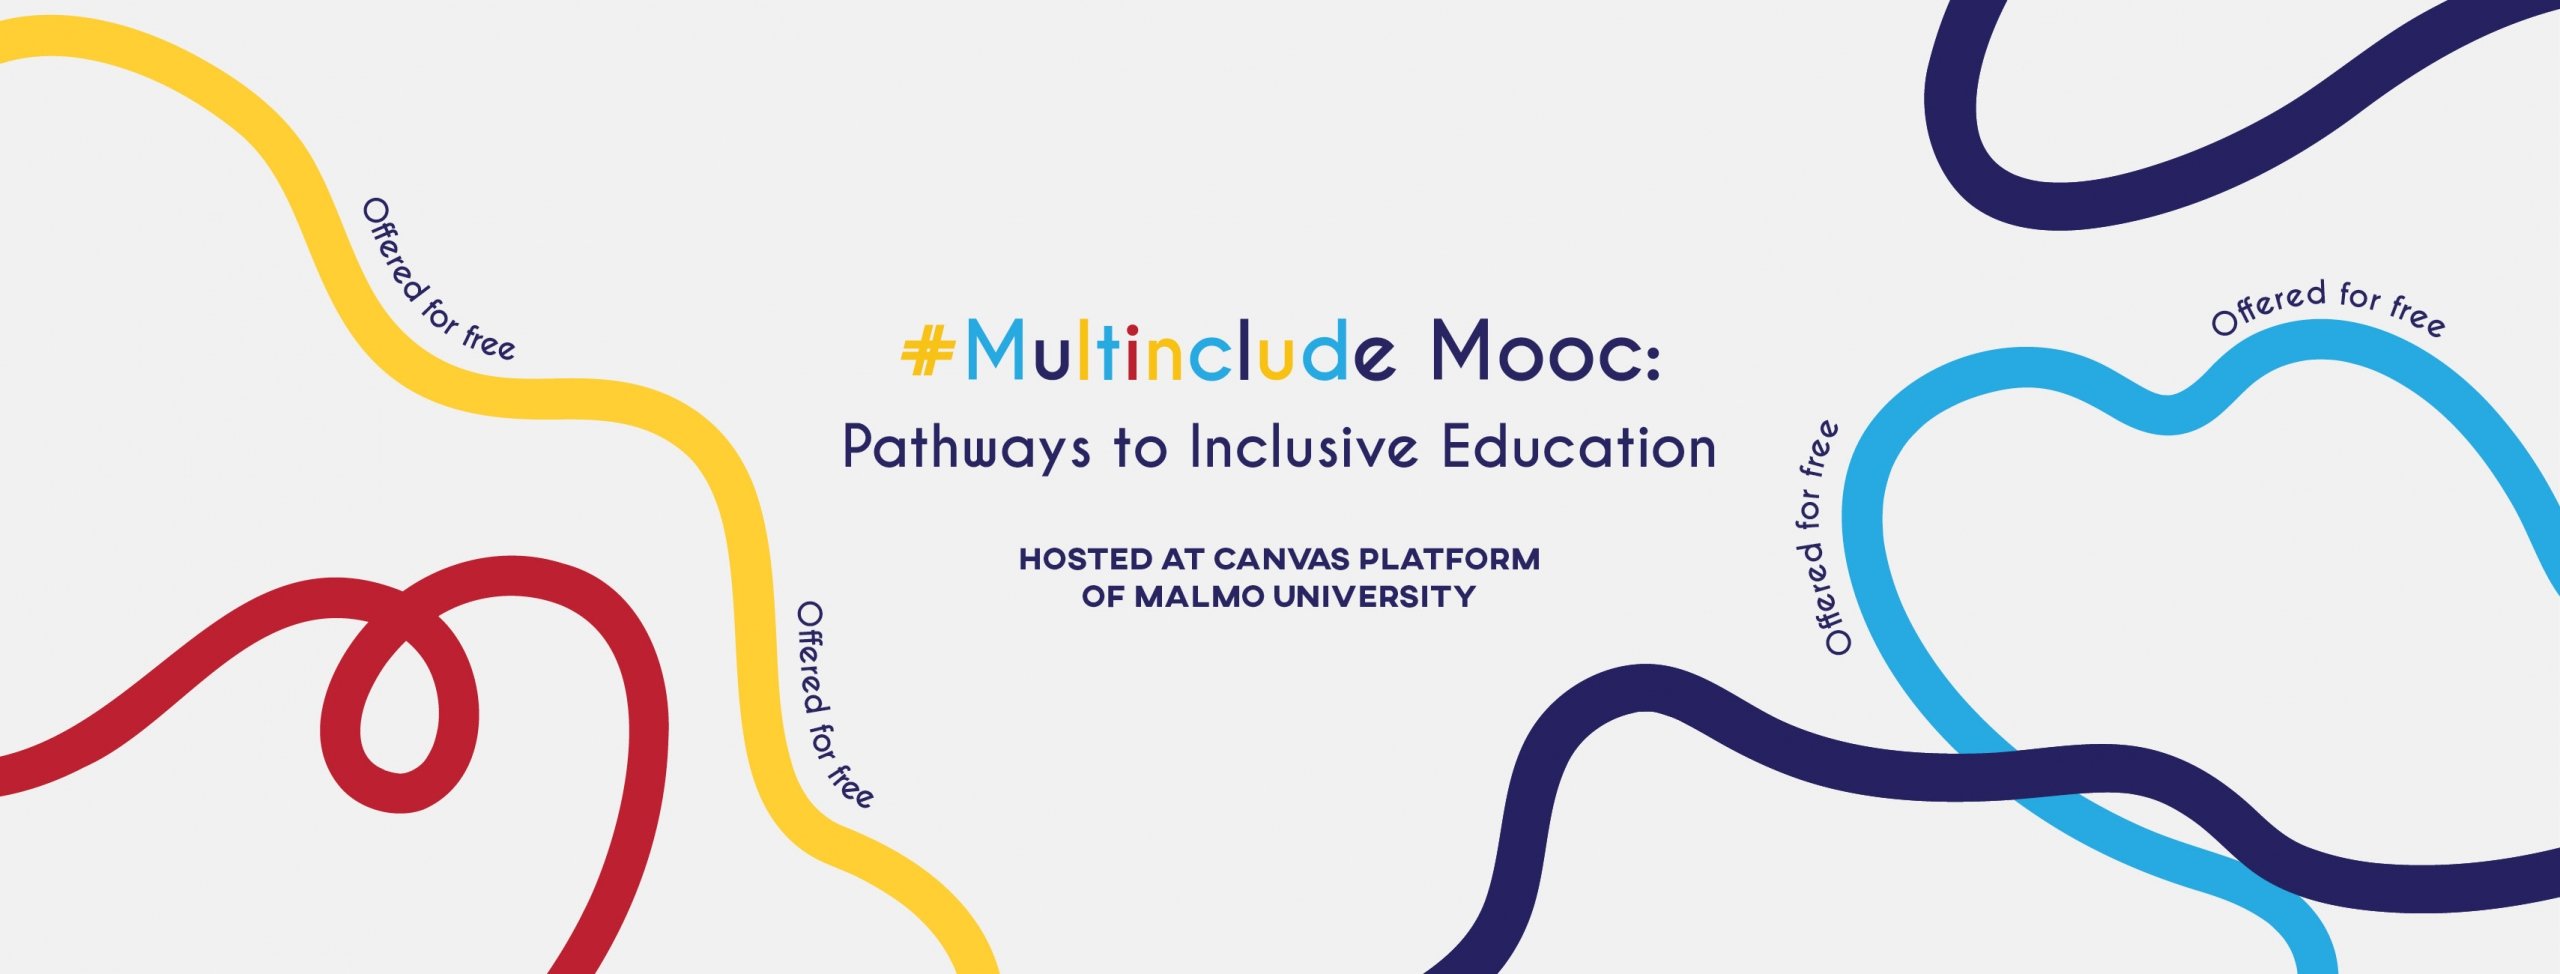 MOOC Pathway to inclusive Education